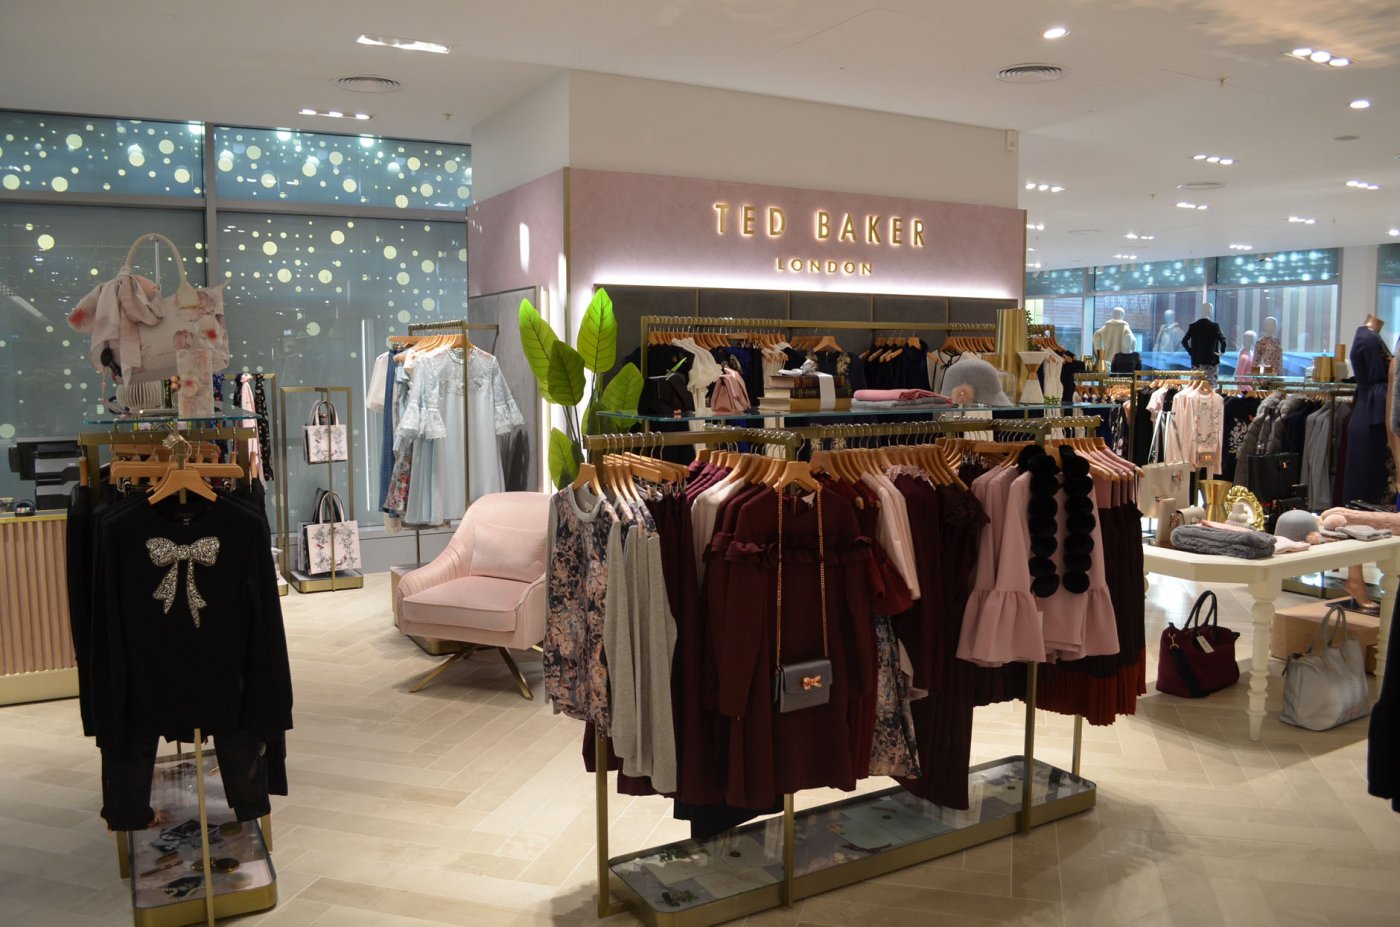  Global Wallcovering Manufacturer Delivers a Polished Performance for Ted Baker Concessions Worldwide 